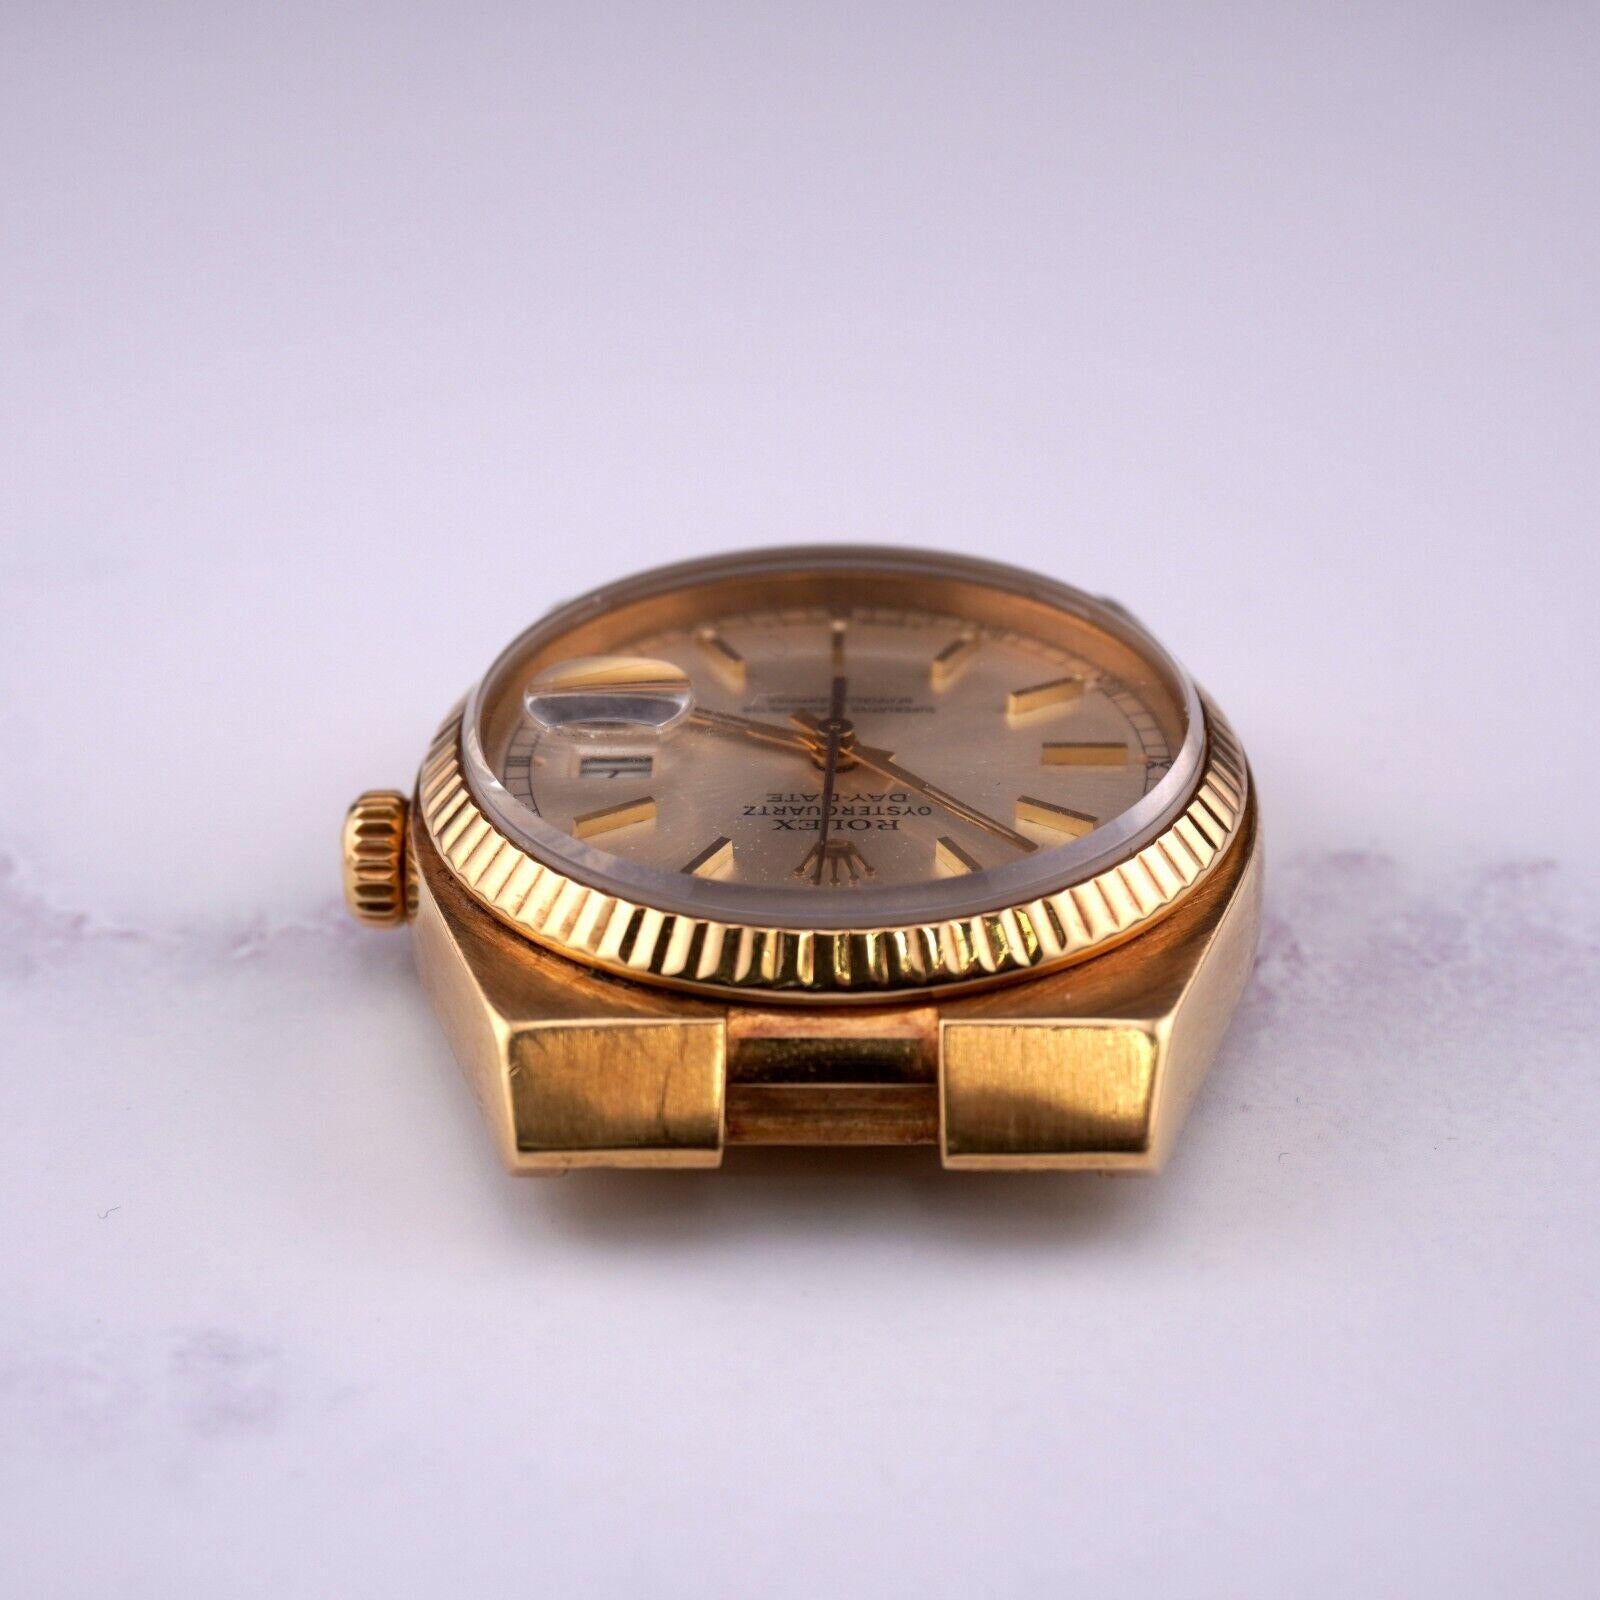 Rolex Oyster Quartz Day-Date 36mm Watch Head

Pre-owned w/ Original Box
100% Authentic Authenticity Card
Condition - (Great Condition) - See Pics
Watch Reference - 19018
Model - Day-Date
Dial Color - Silver
Material - 18k Yellow Gold